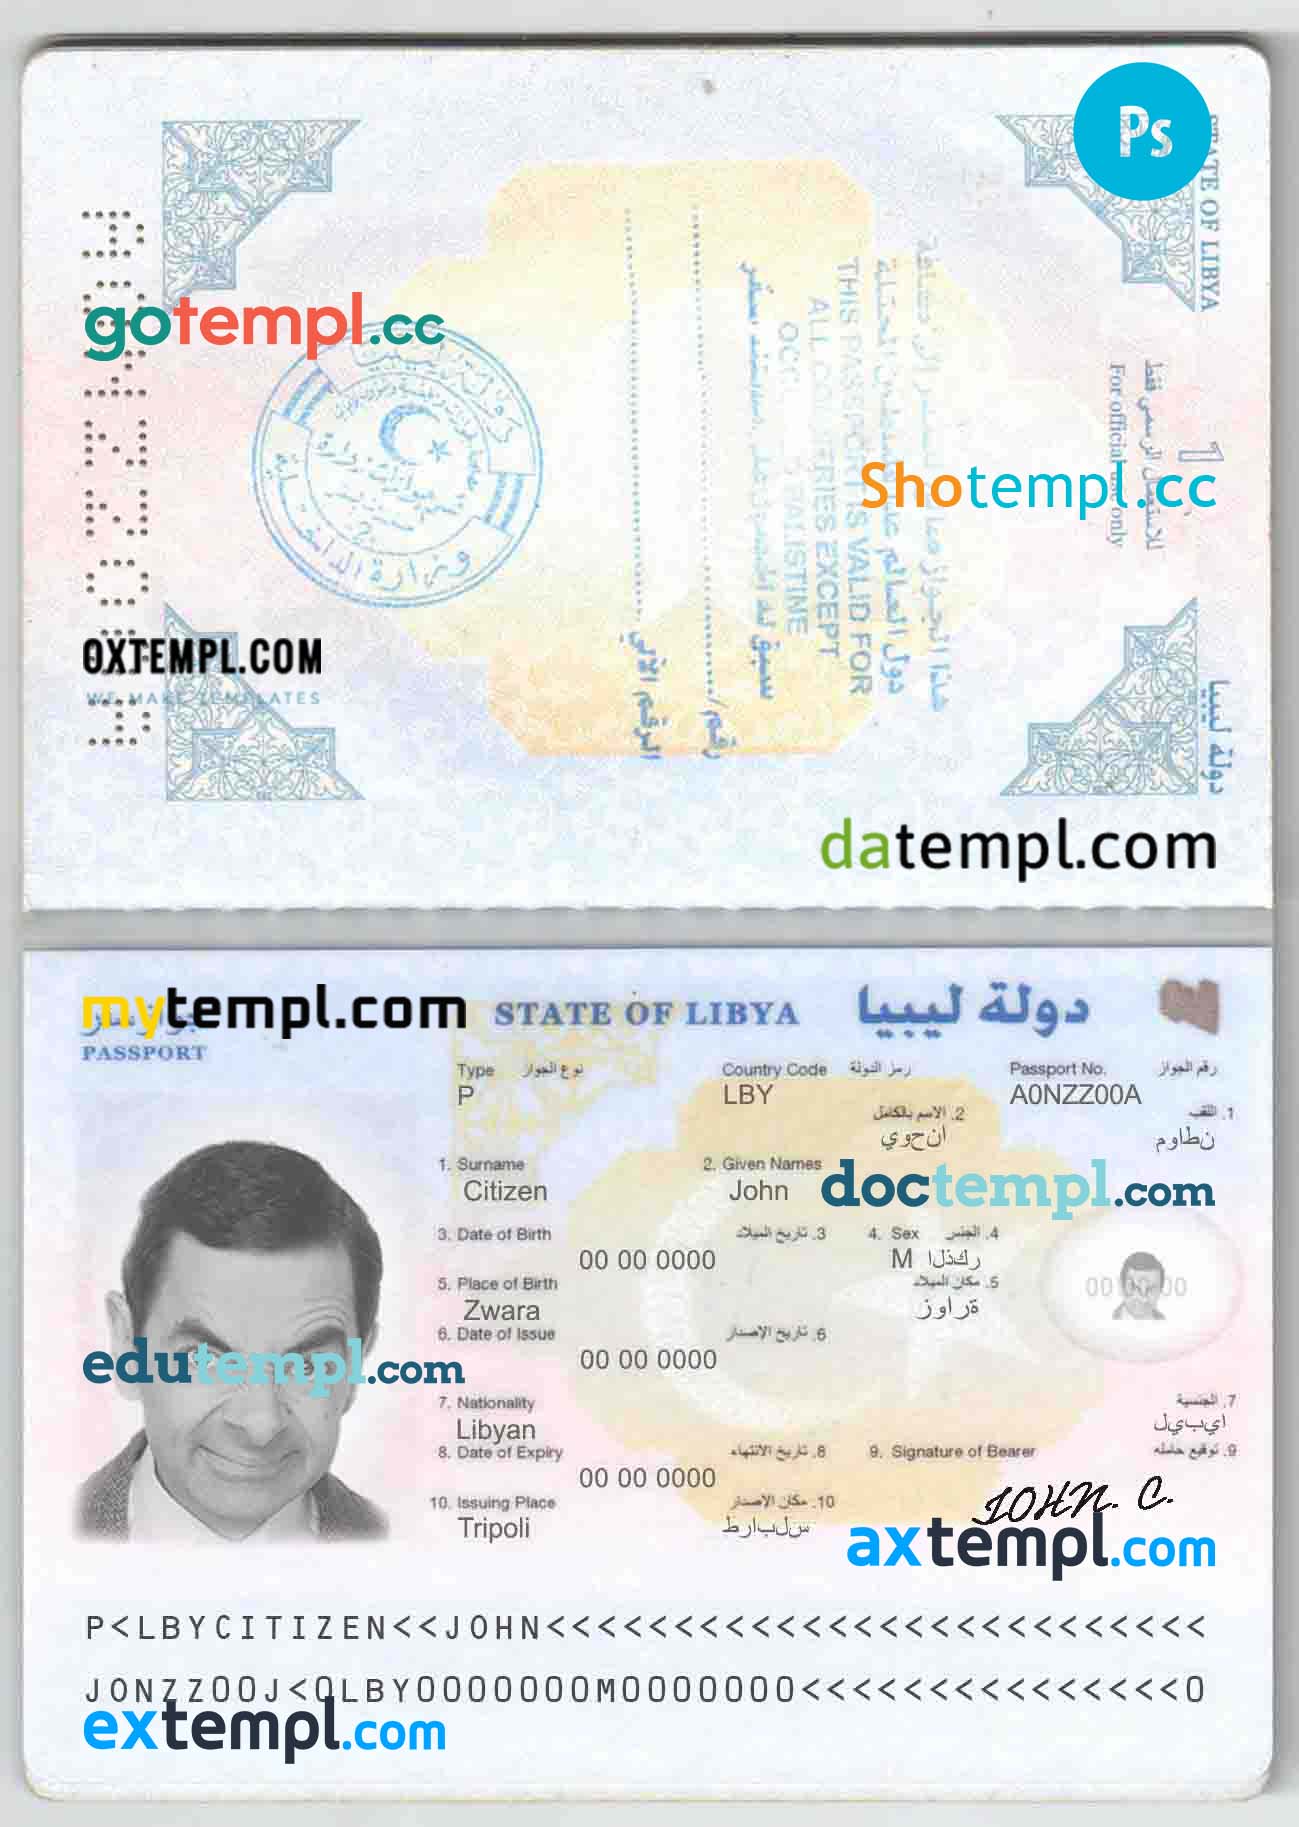 Libya passport PSD files, scan and photo look templates, 2 in 1